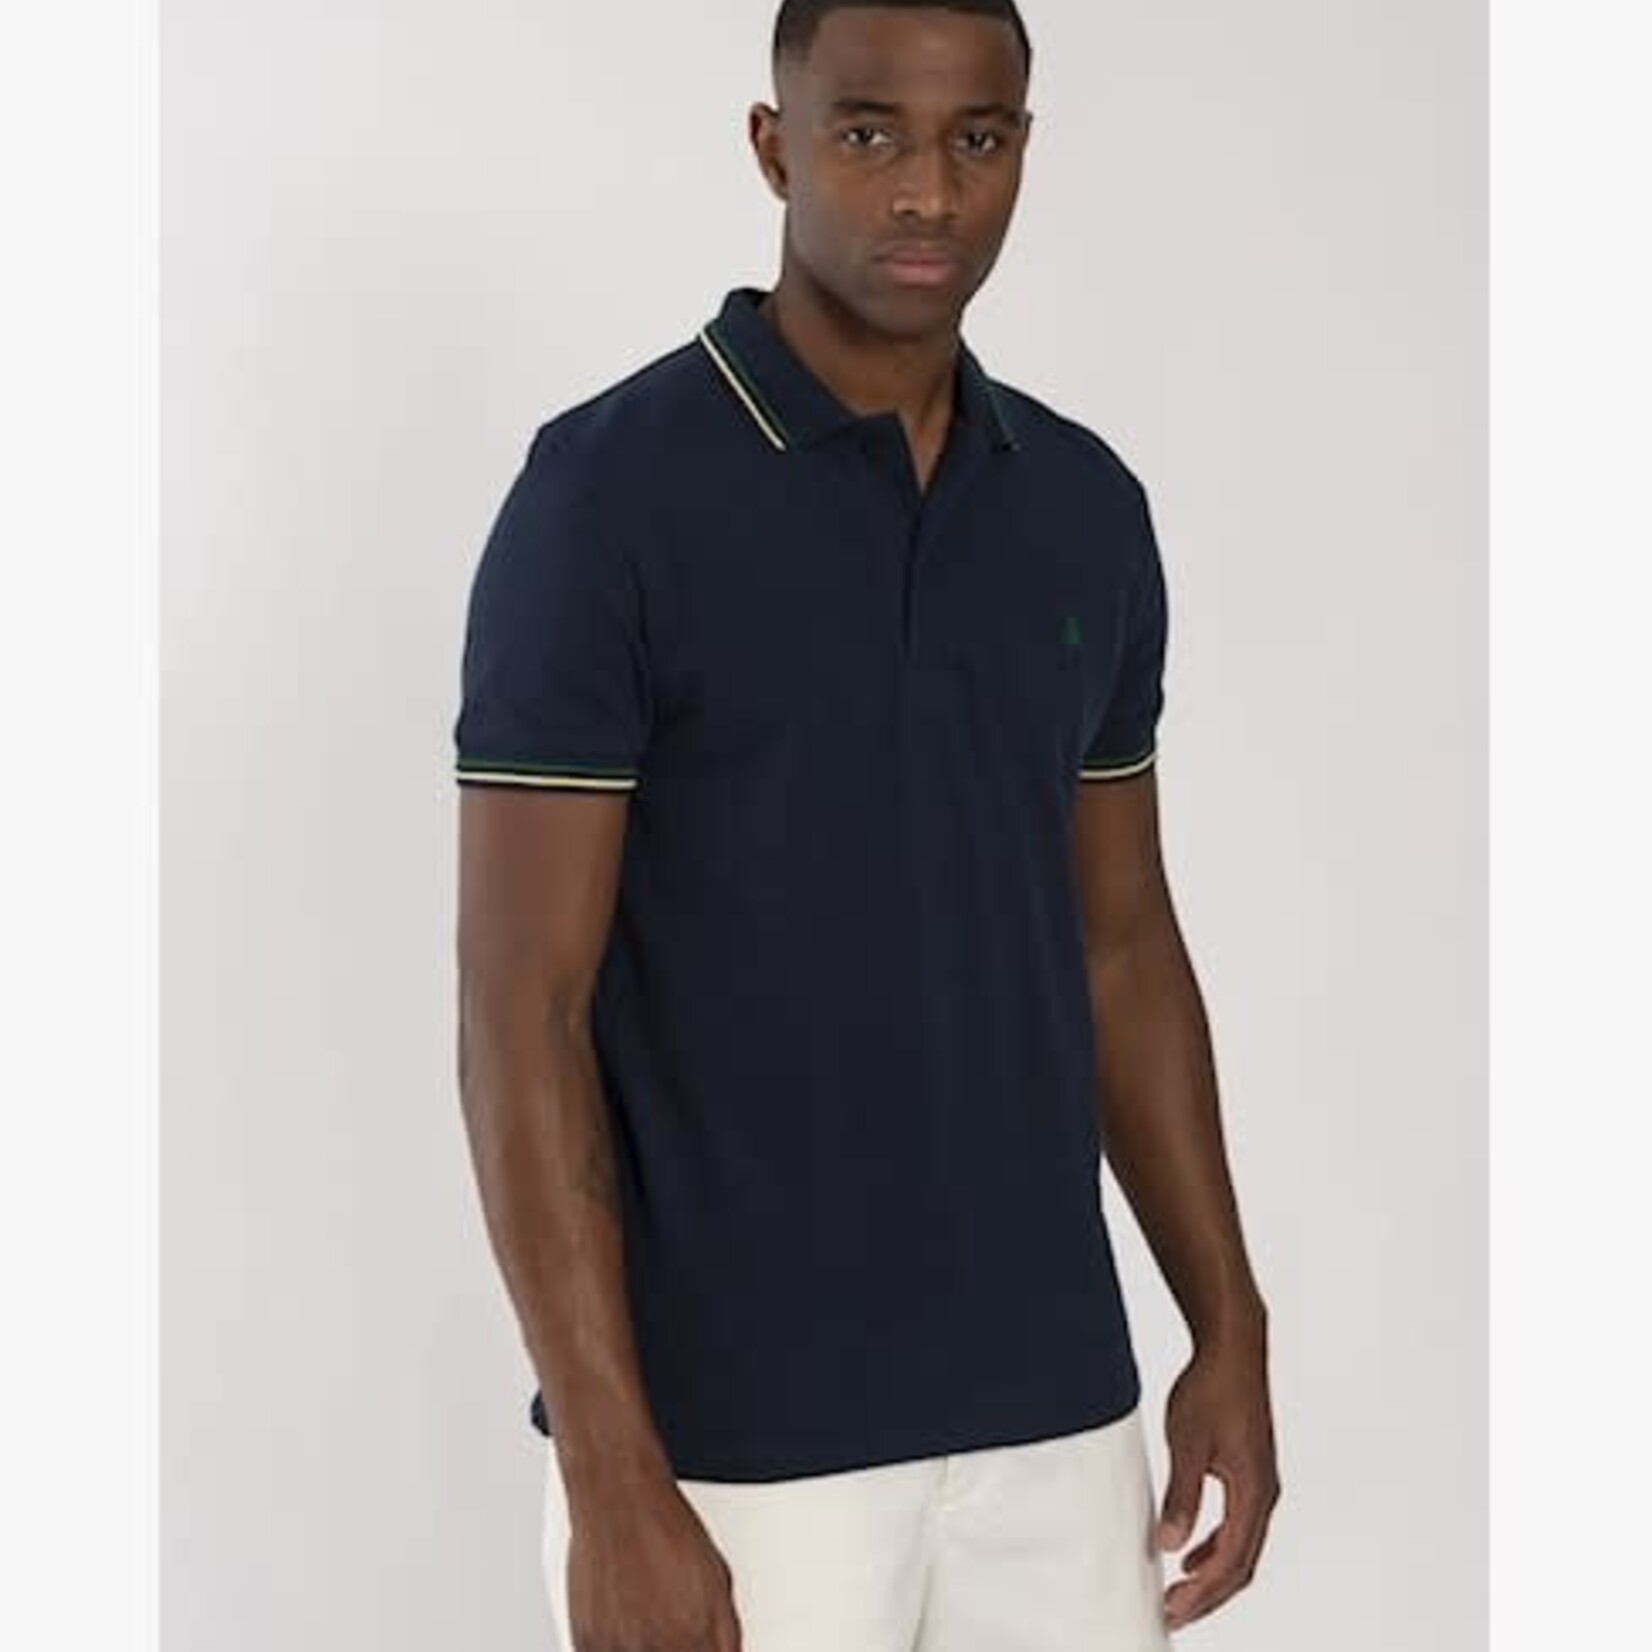 ANTWRP ANTWRP POLO SHIRT INK BLUE